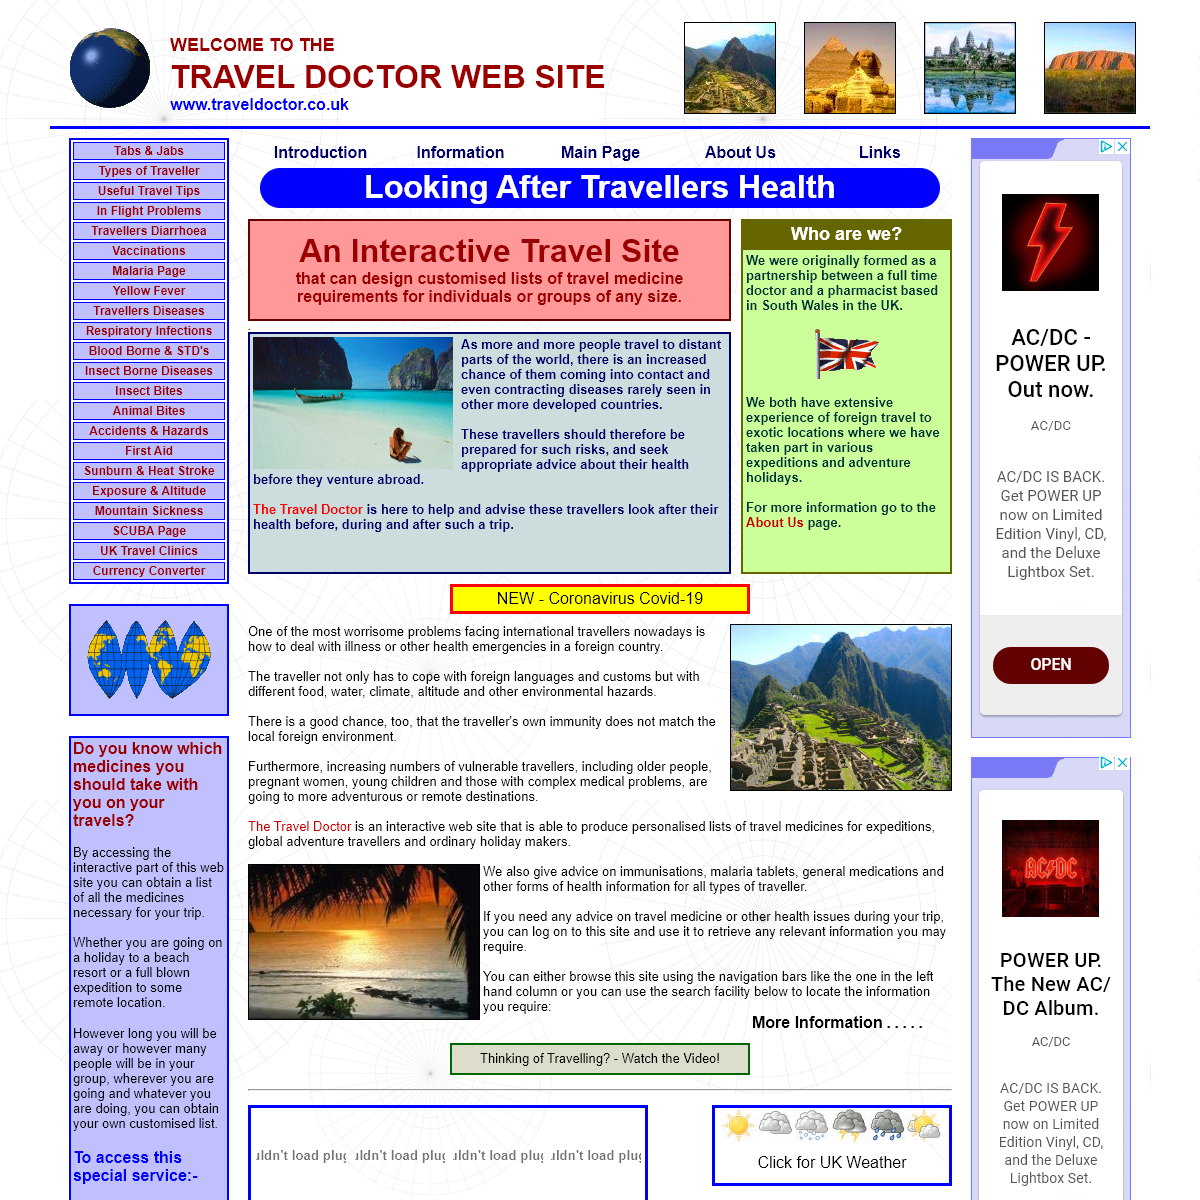 A complete backup of traveldoctor.co.uk